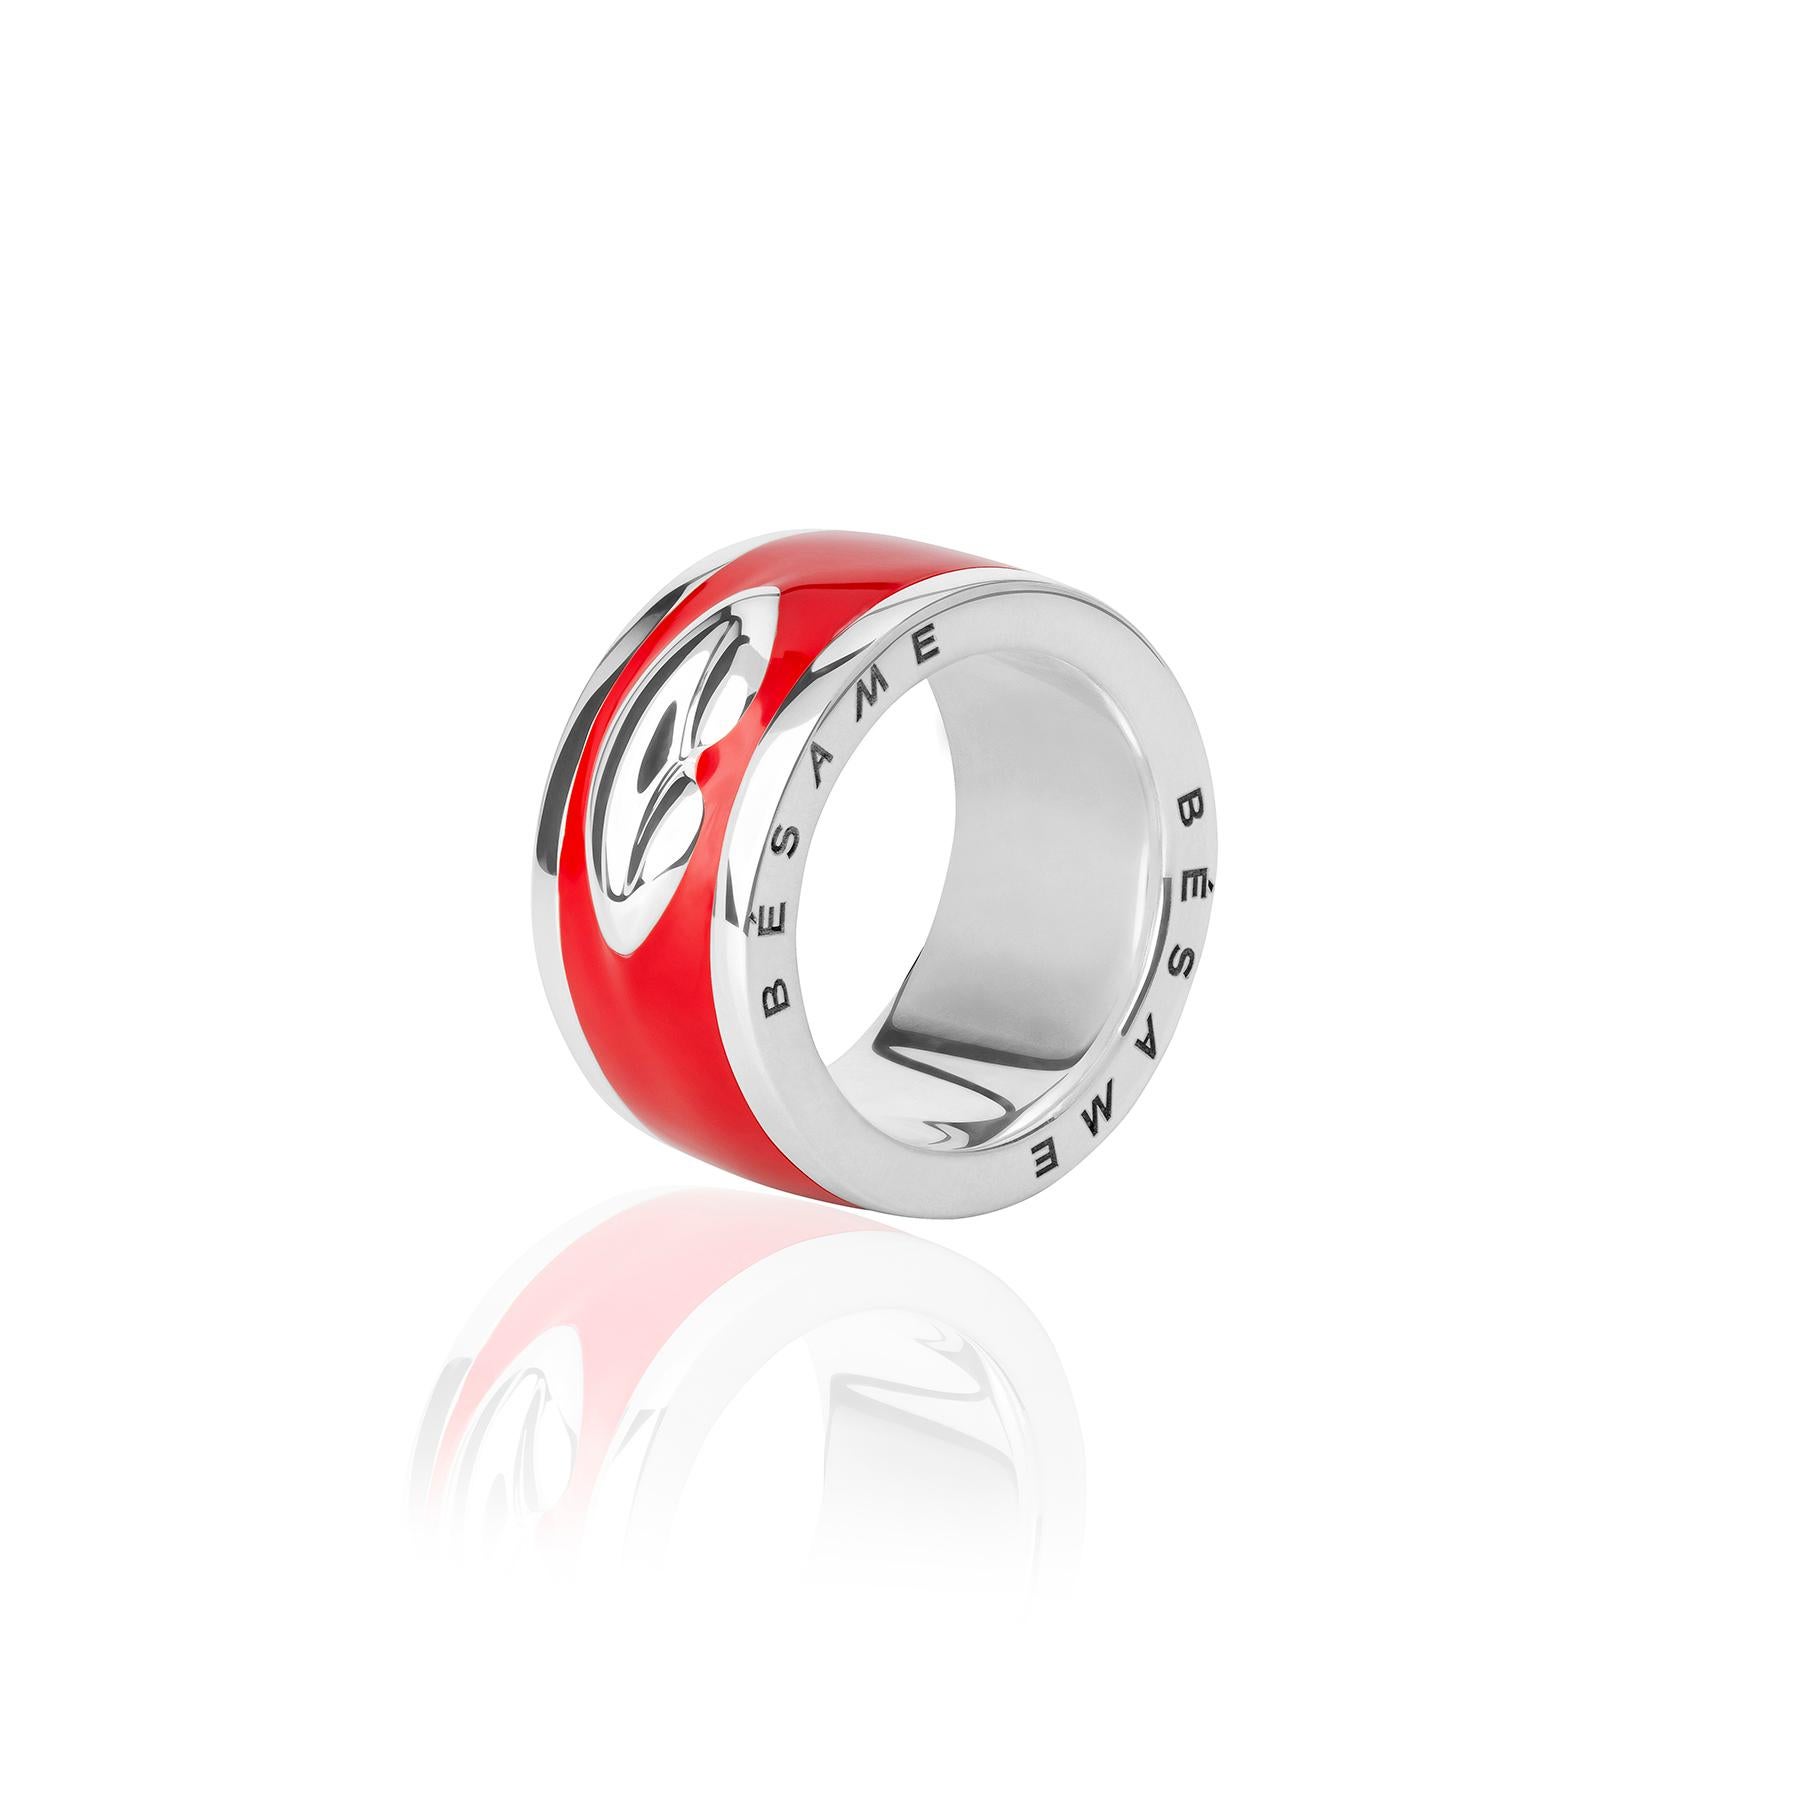 The Bésame Red Color Ring from the Bésame collection by TANE is made in sterling silver and nanoceramic details. The silver frame contains TANE's exclusive red ceramic inside, giving a touch of color and boldness to the piece. In the center, the